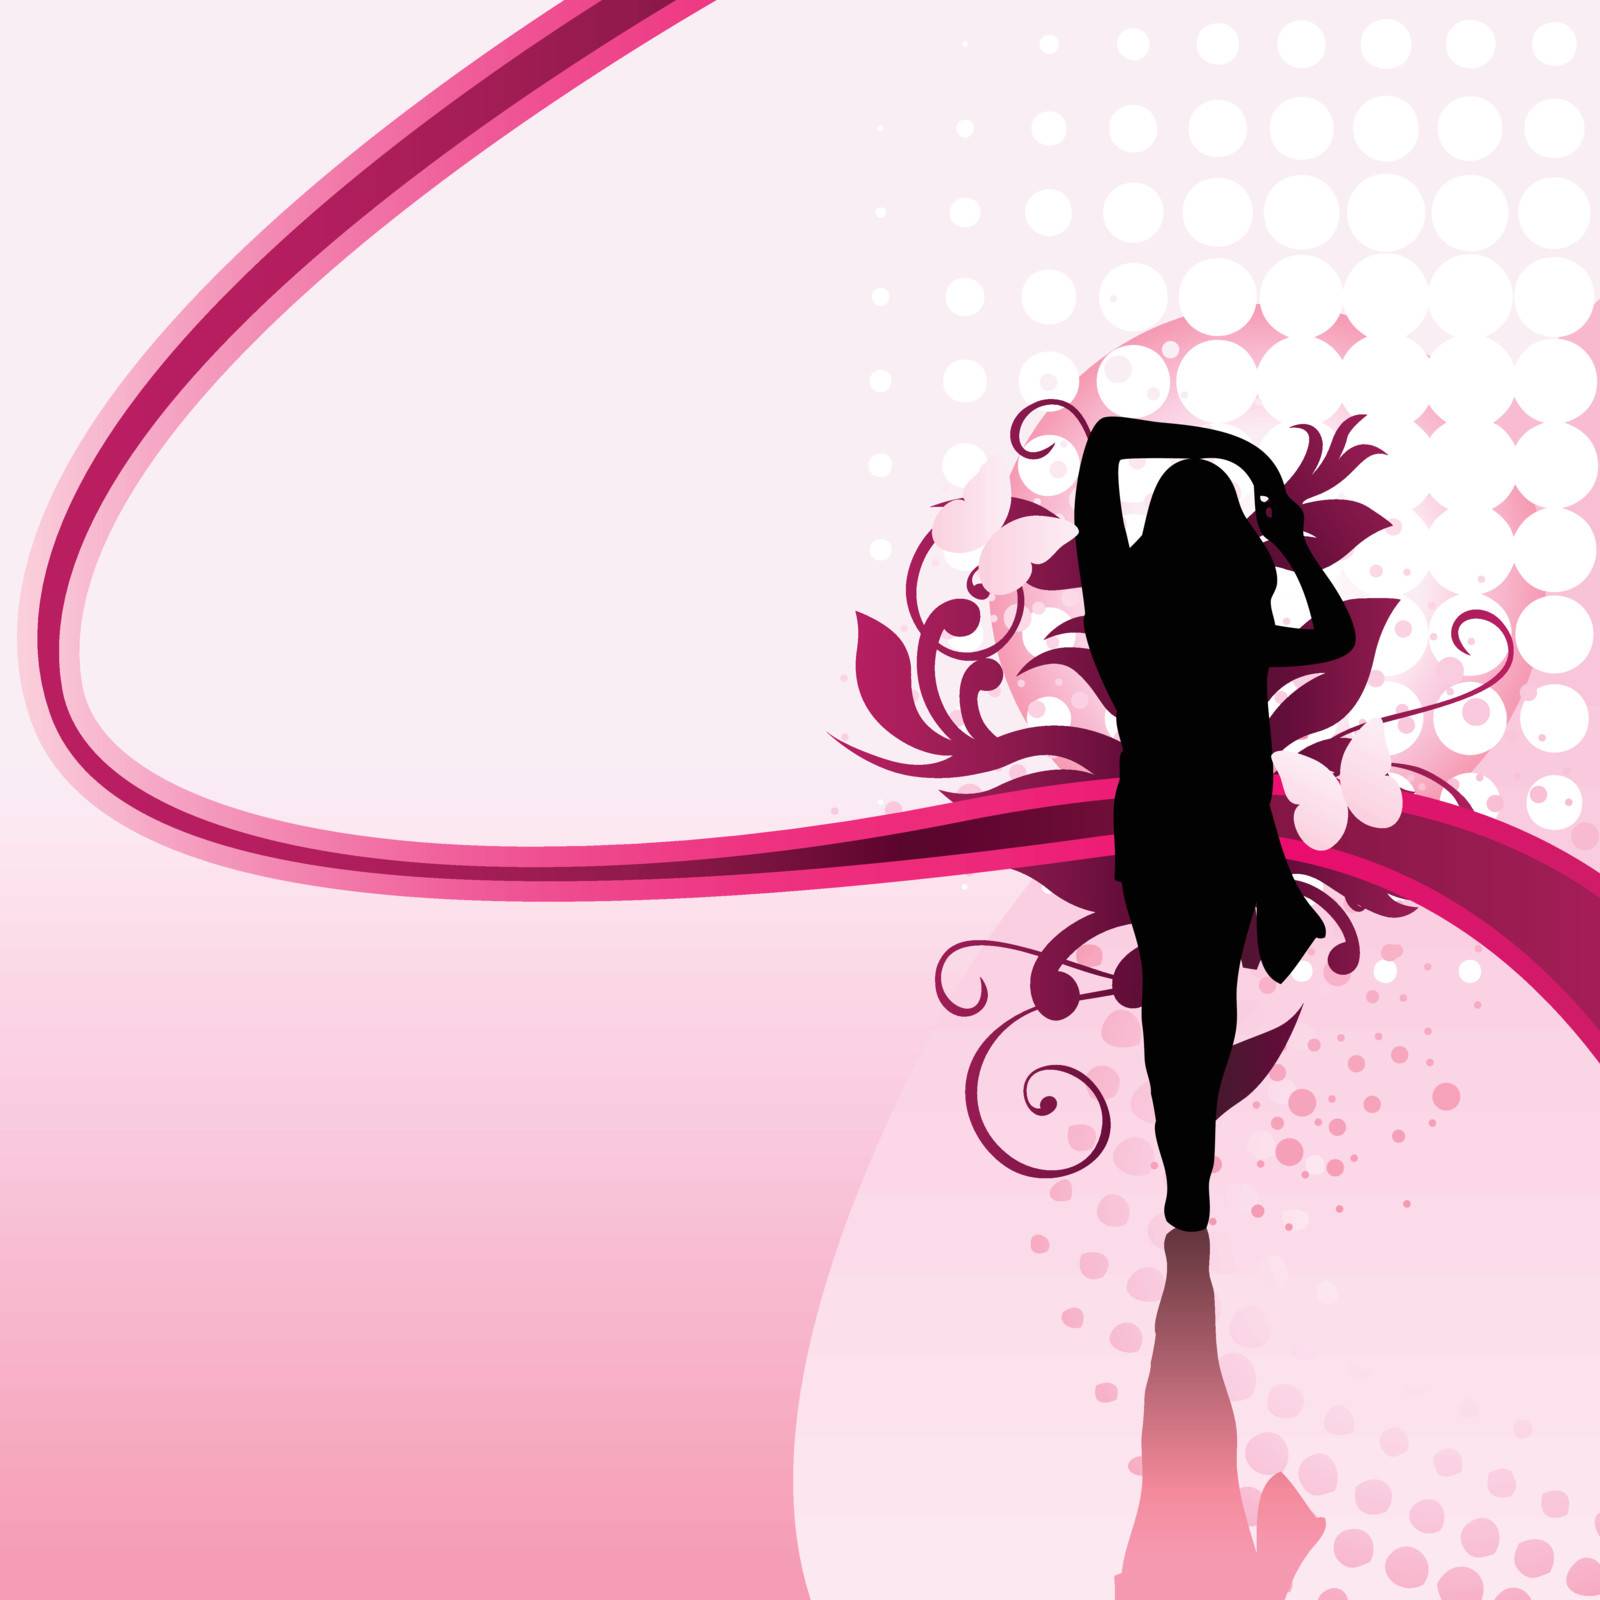 Beautiful girl silhouette with pink swirls and dots